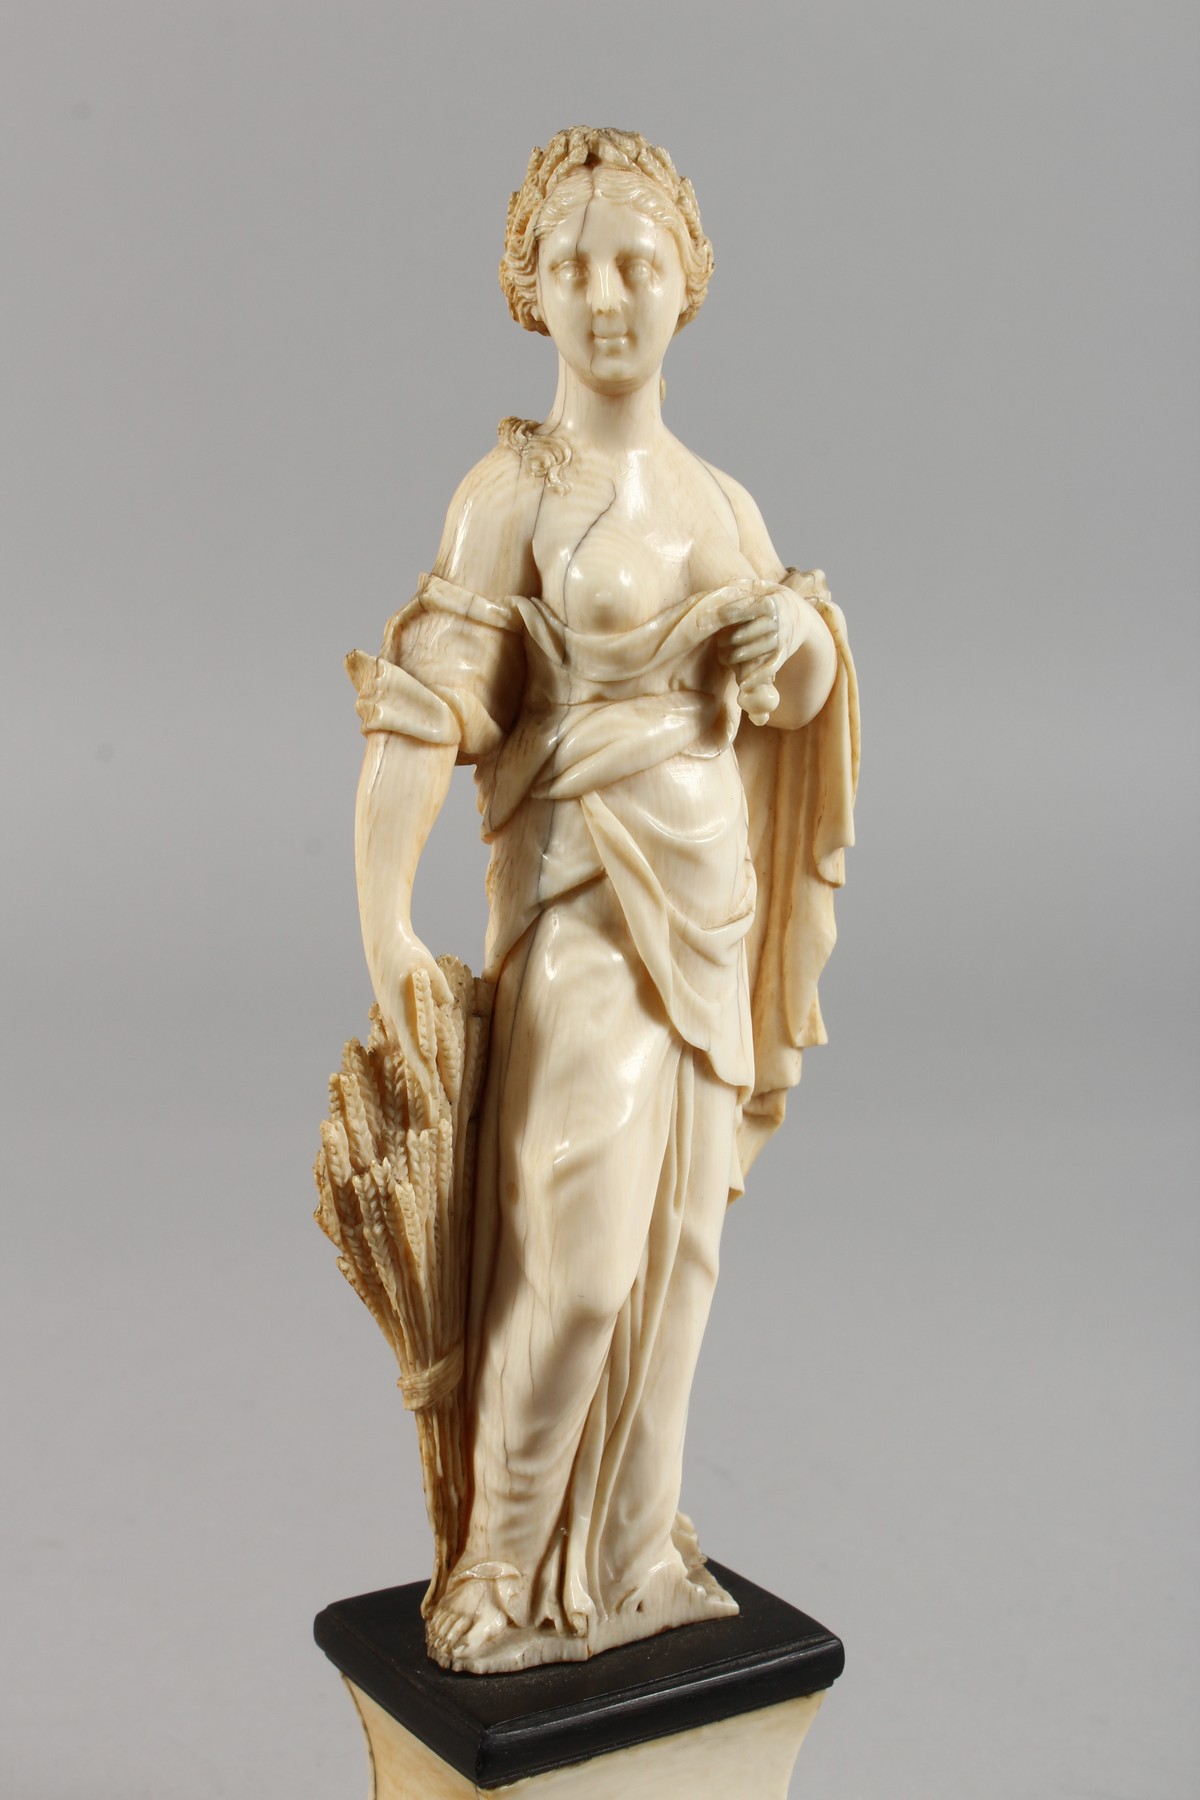 AN 18TH CENTURY CARVED IVORY FIGURE OF A YOUNG FEMALE FIGURE depicting AUTUMN, standing on a plinth. - Image 2 of 5